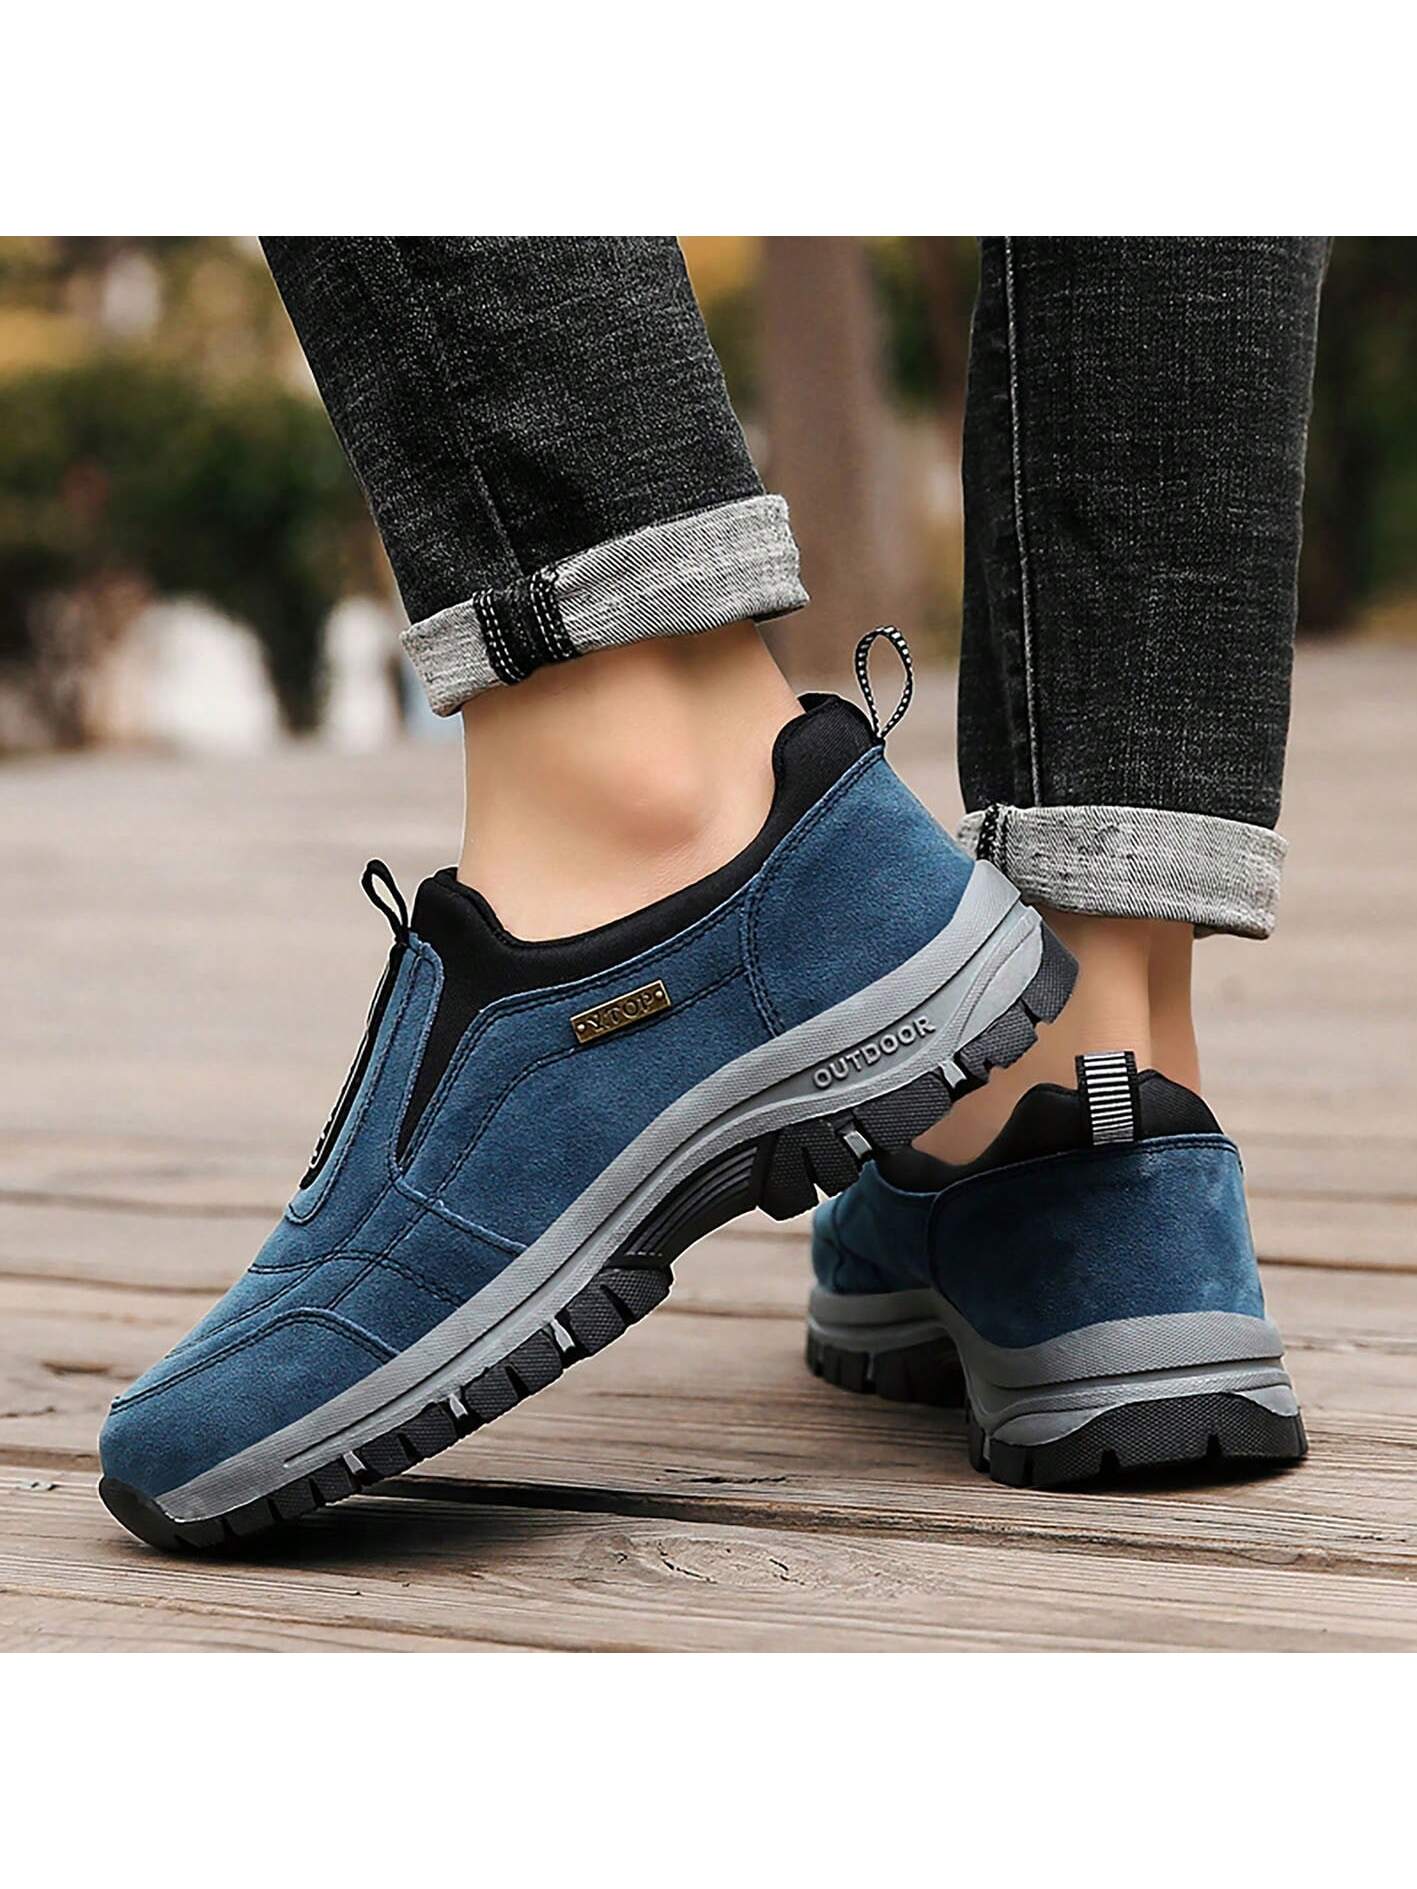 Men's Slip-on Waterproof & Slip-resistant Outdoor Climbing Shoes, Casual Sports Shoes